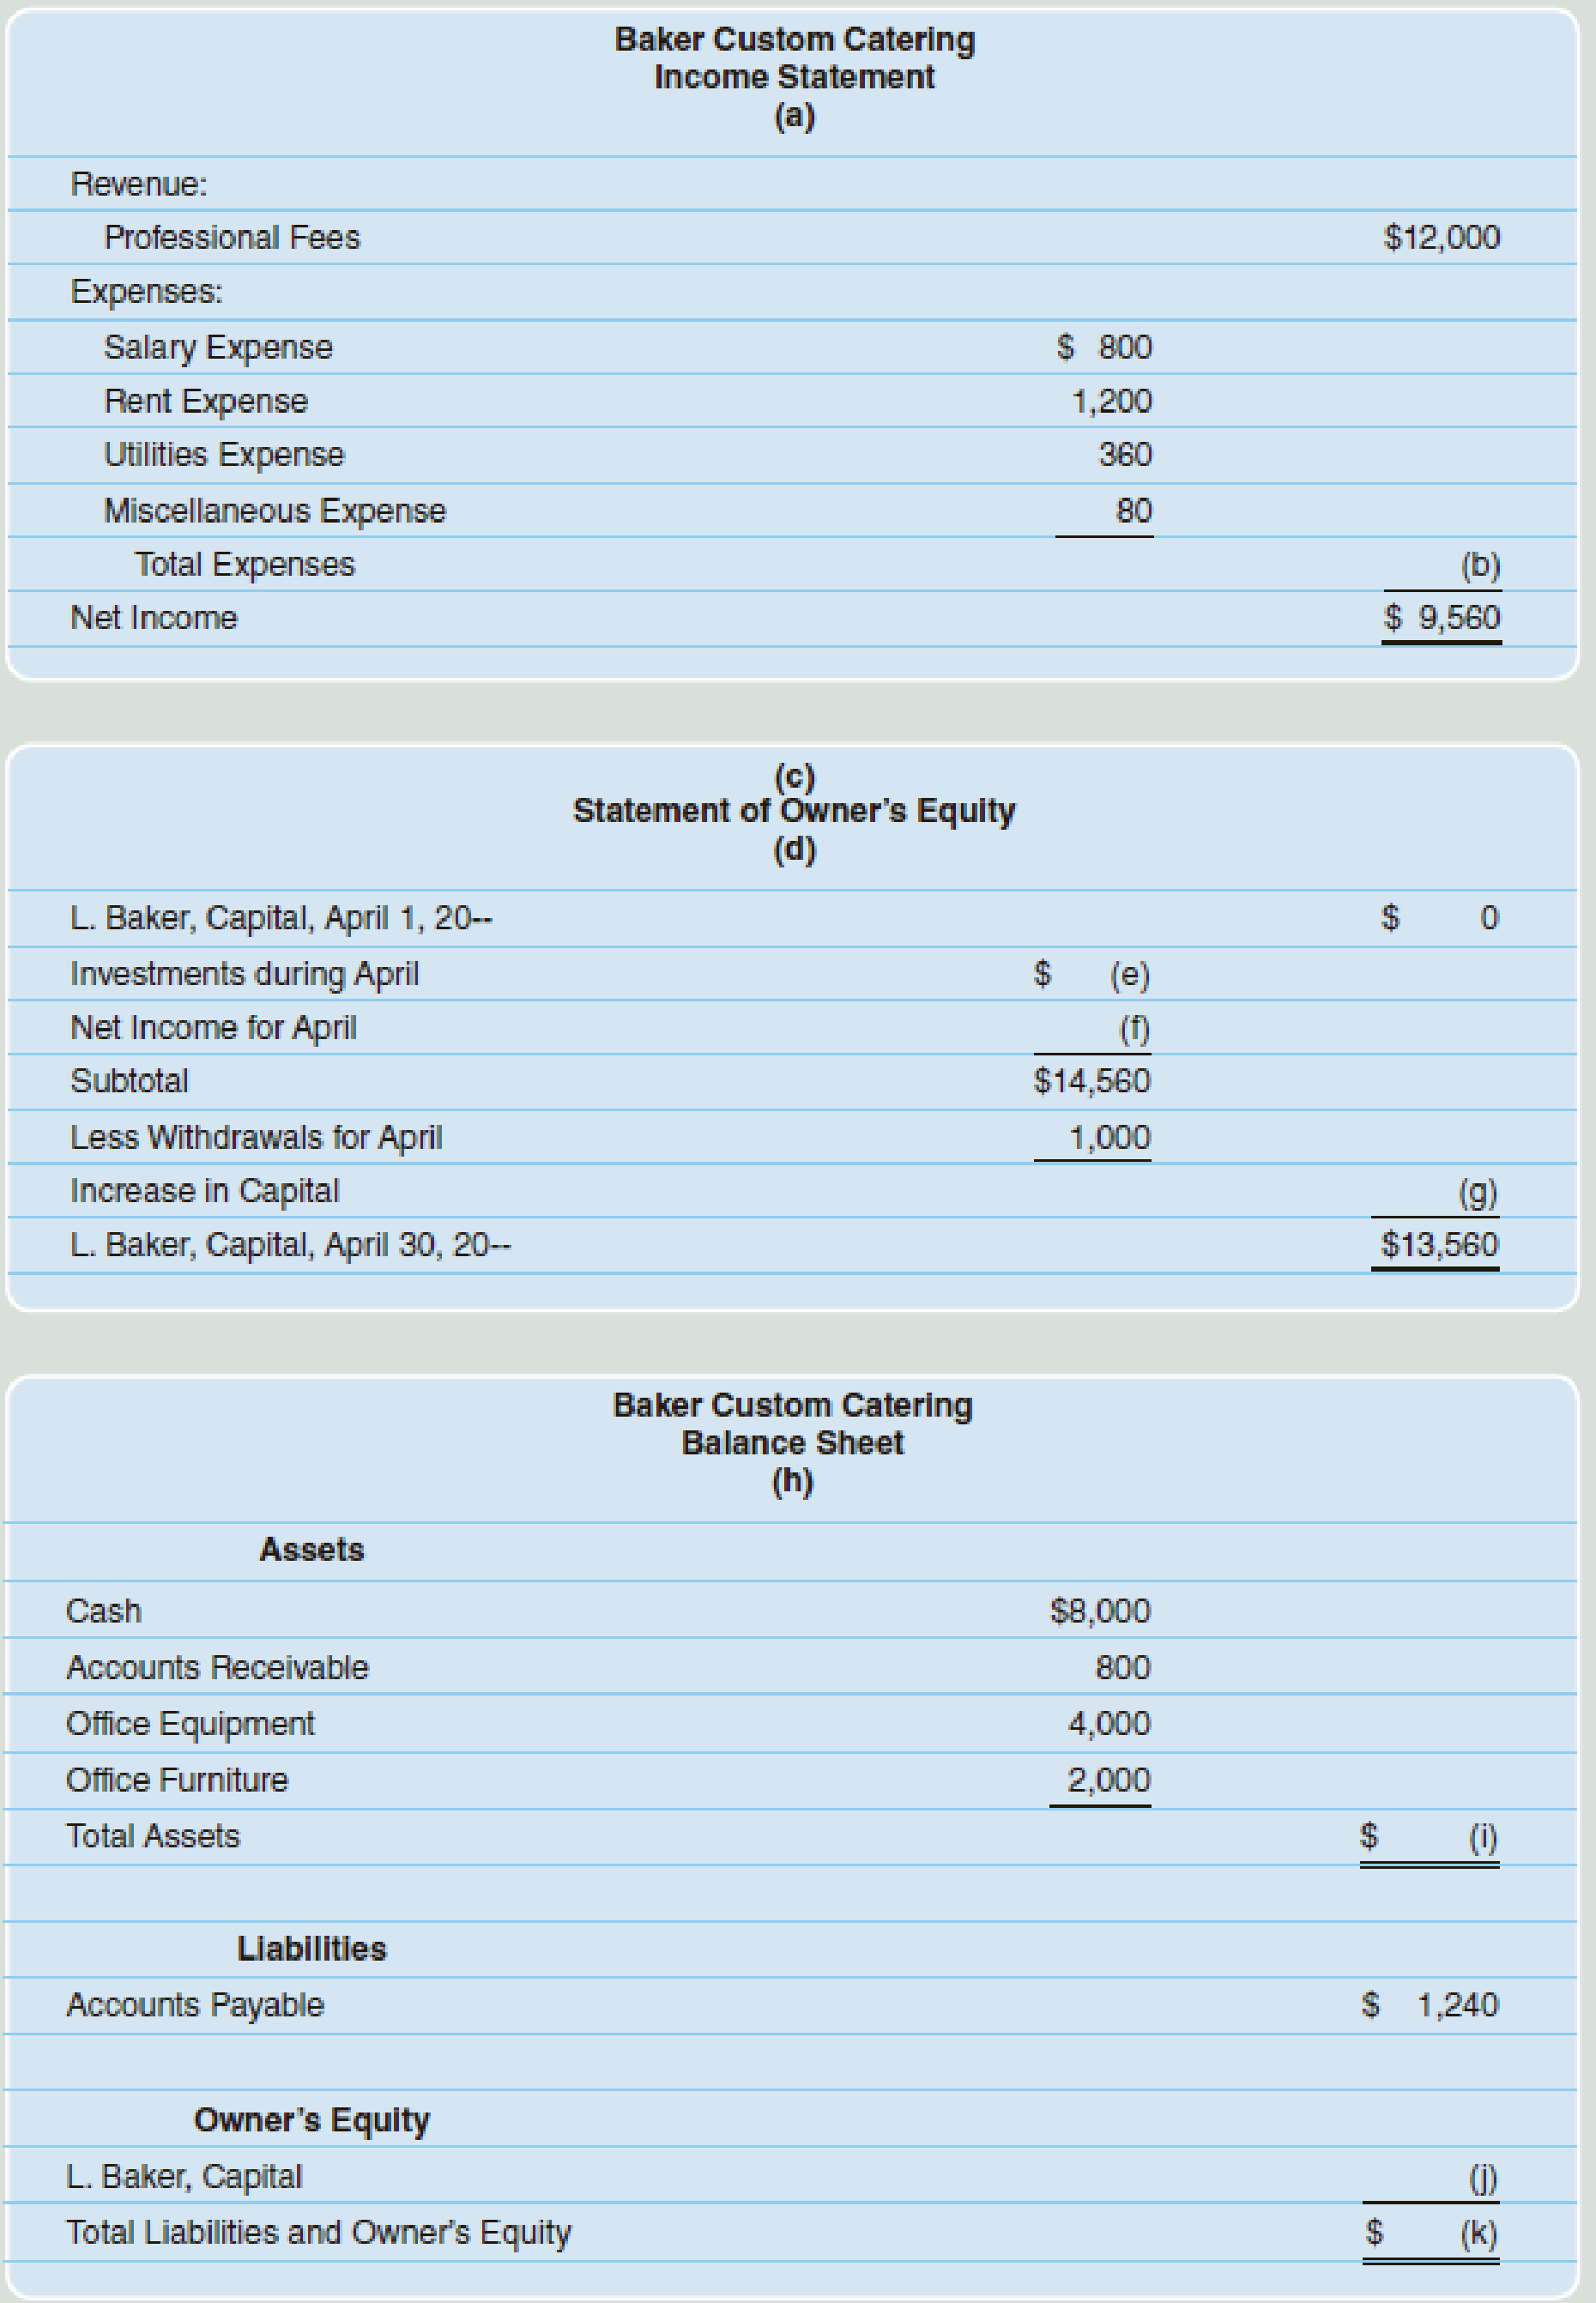 Chapter 2, Problem 5PB, The financial statements for Baker Custom Catering for the month of April are presented below. 